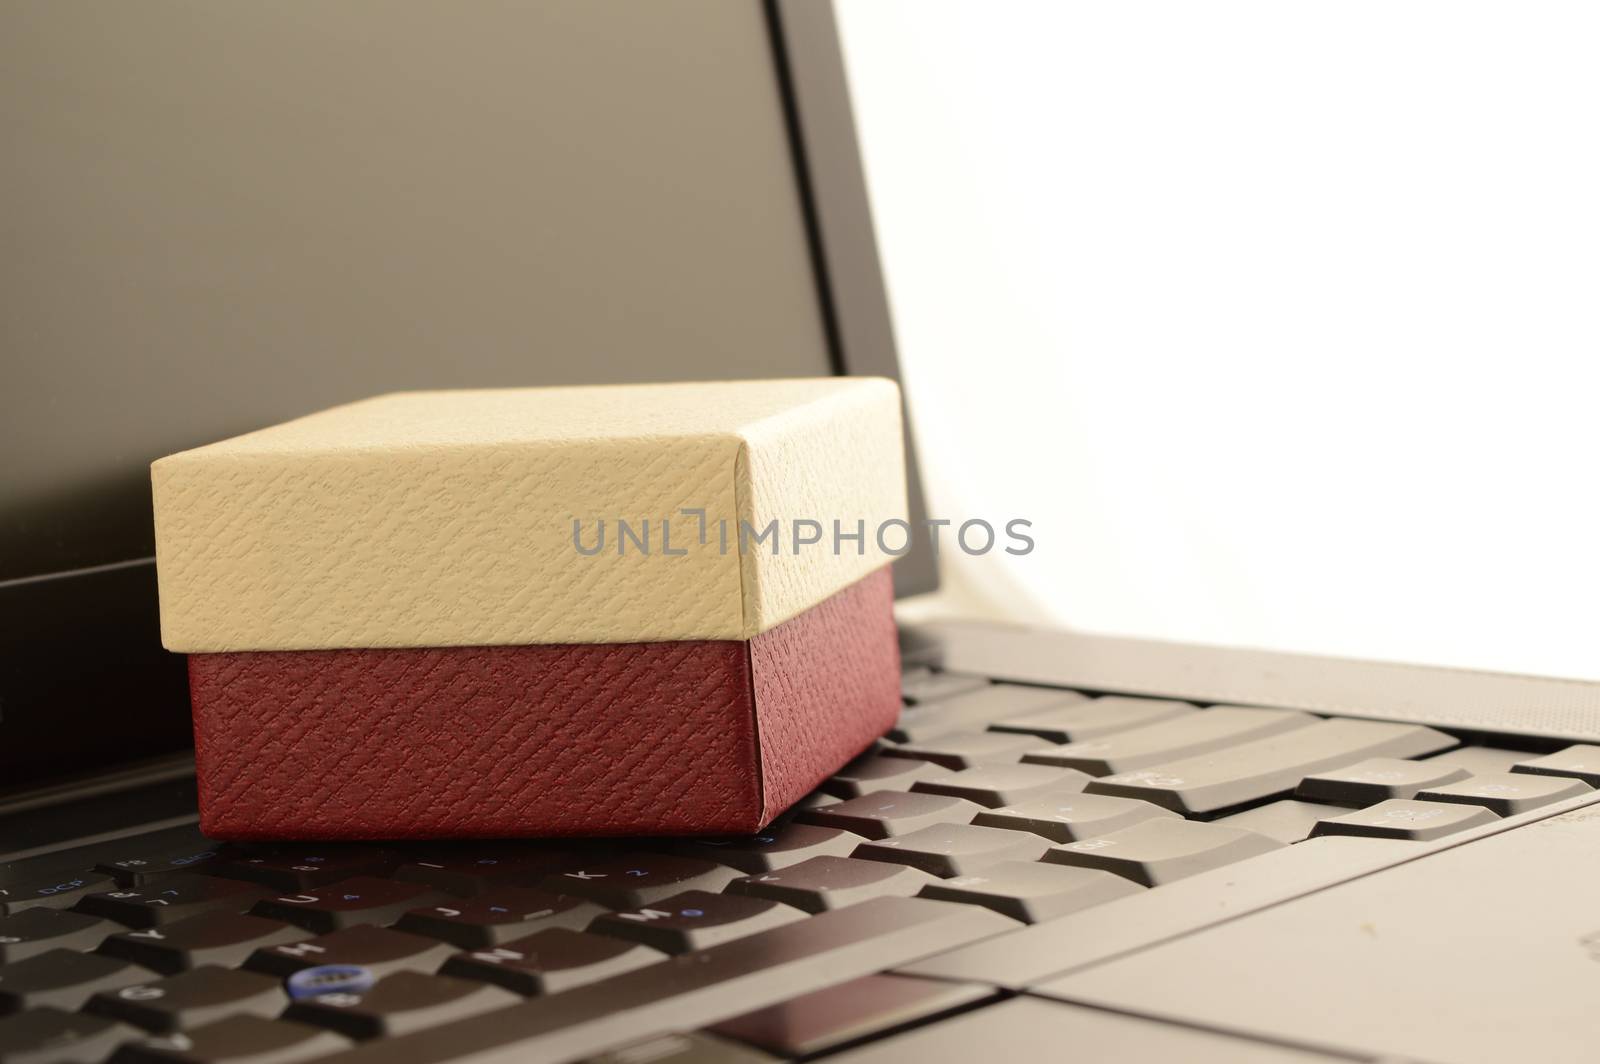 A gift box and laptop for online shopping.